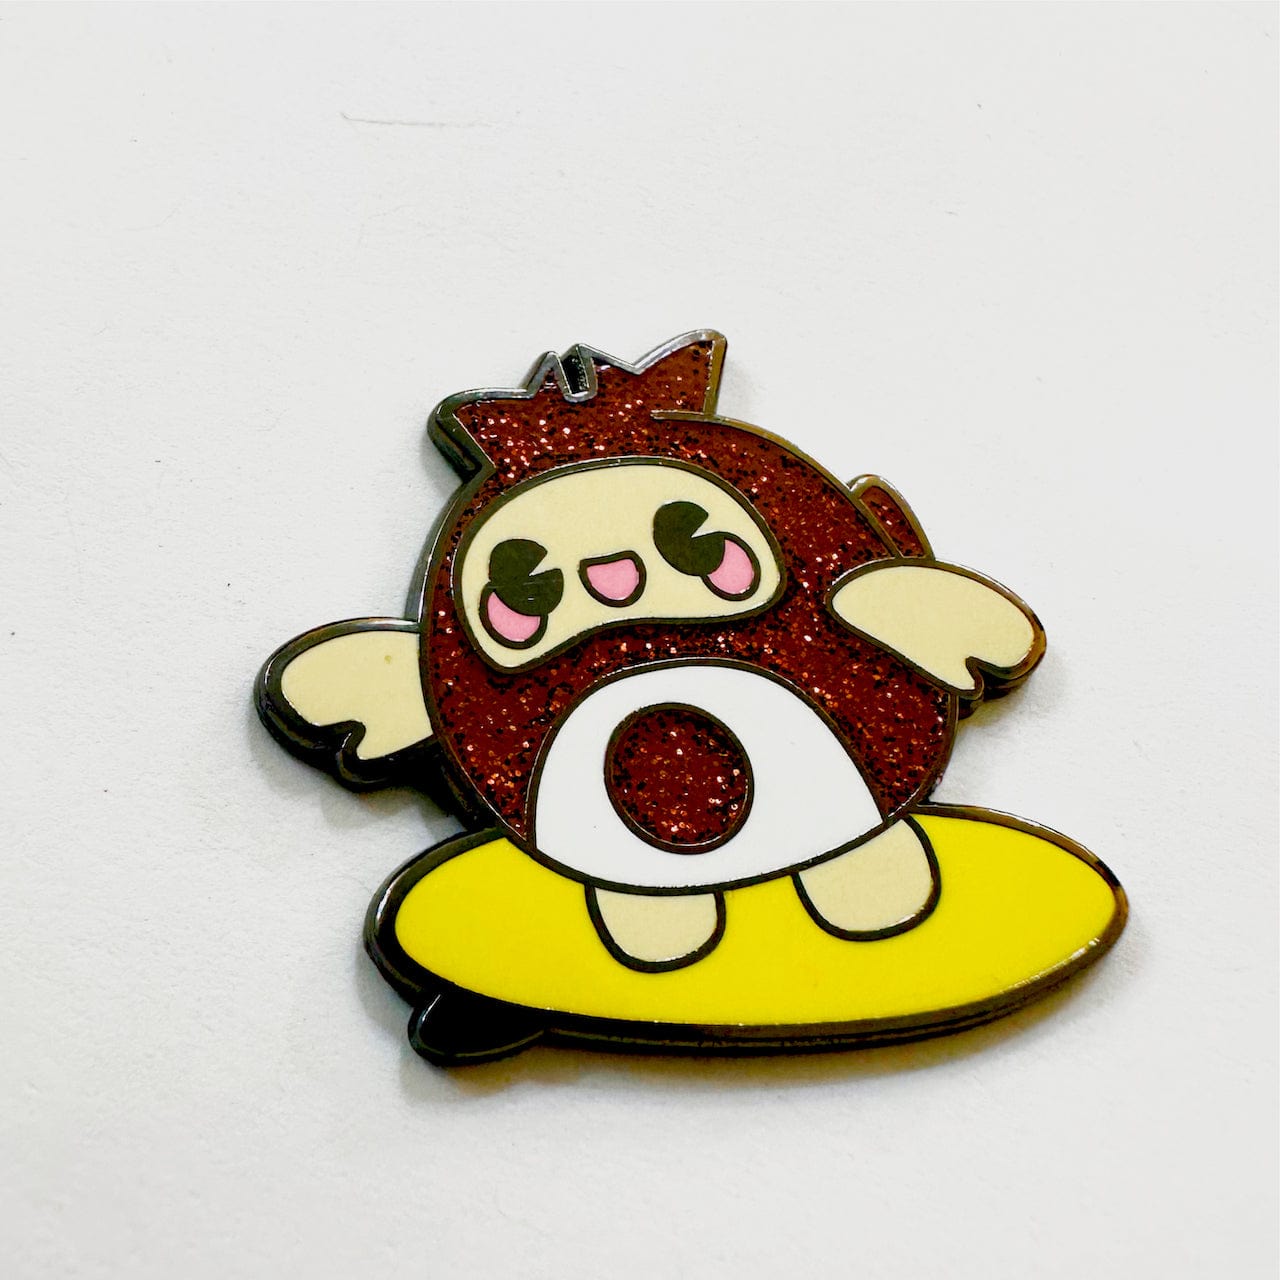 Pinbuds Enamel pin Surfing Otter pin - Chitan from Okinawa prefecture (Japan Mascot Collection)